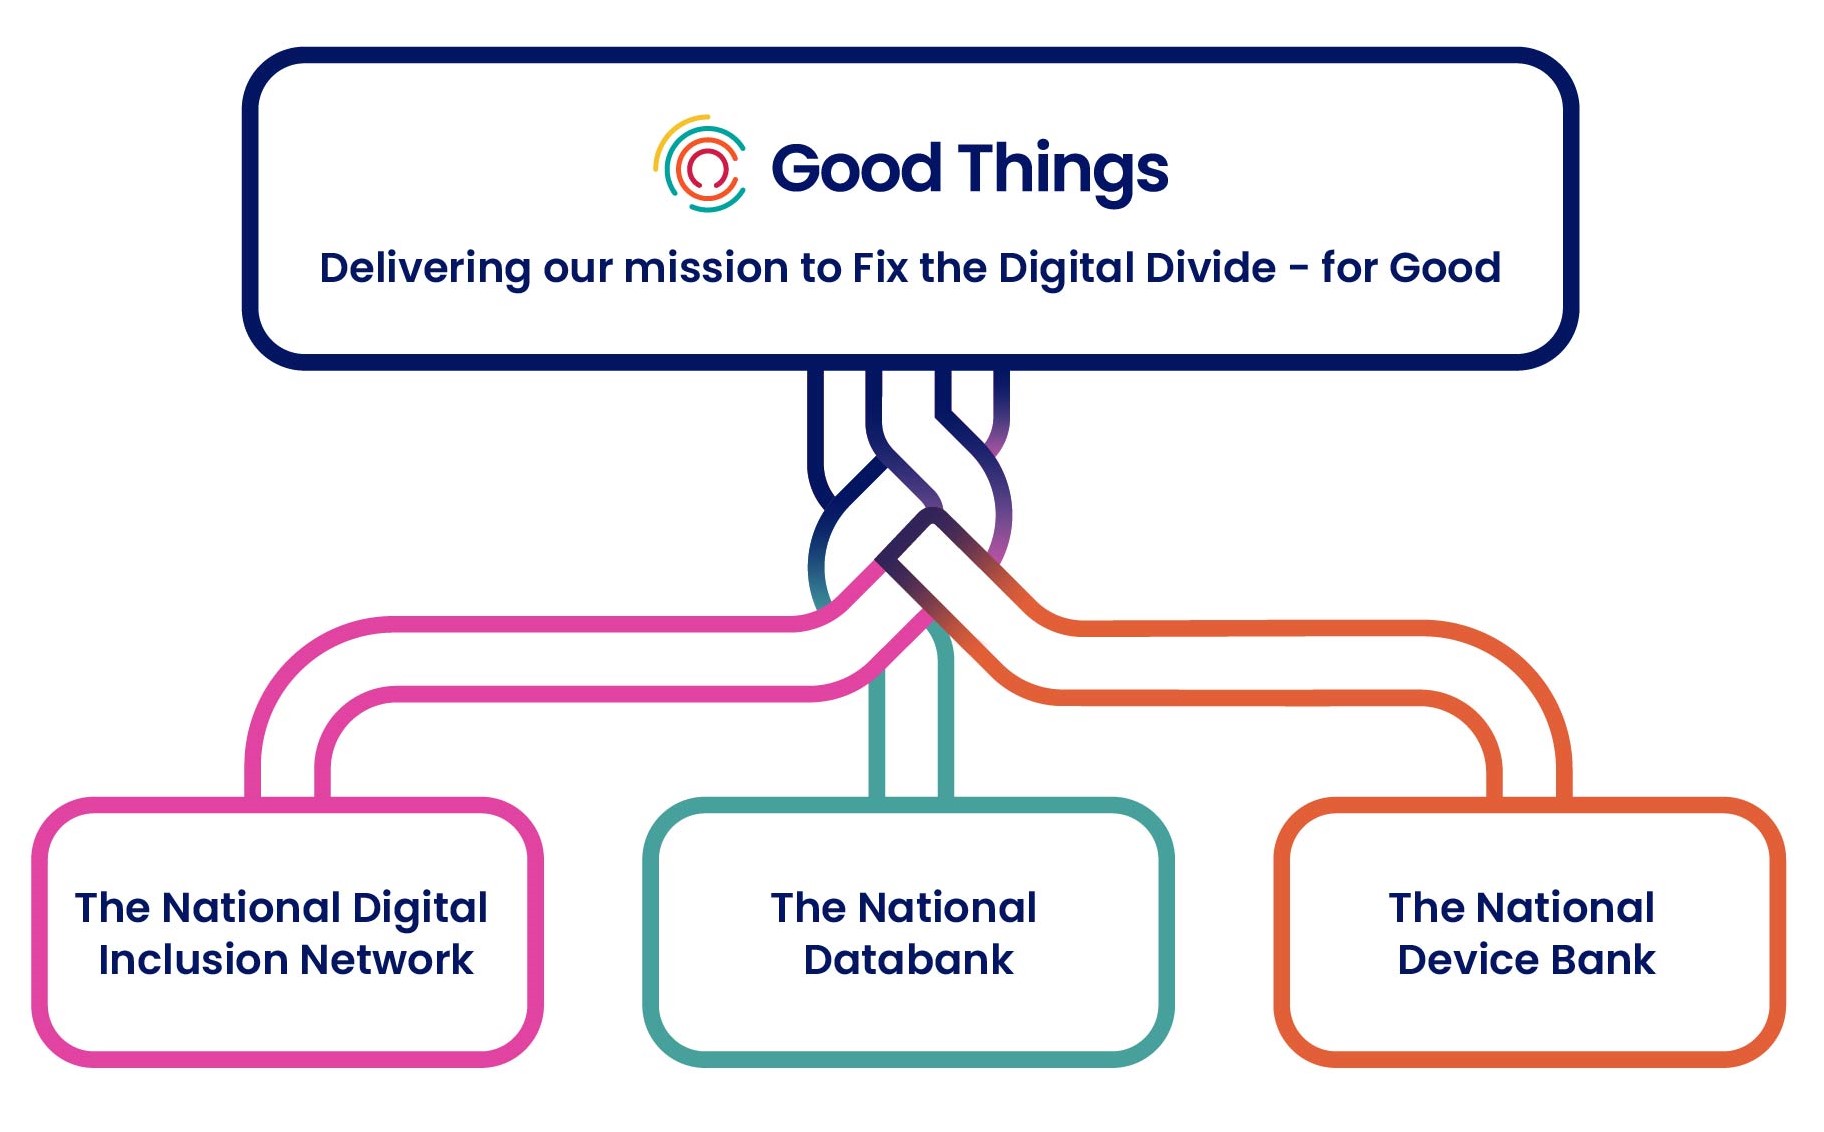 Good Things Foundation strategy to fix the digital divide. There's a diagram with one box at the top displaying Good Things' logo, and text that says Delivering our mission to Fix The Digital Divide - for good. There's a plait extending from the bottom of the box and branching off to three boxes underneath. The first box says the National Digital Inclusion Network. The second box says the National Databank. The third box says the National Device Bank. These are the three pillars of Good Things Foundation's digital inclusion services.